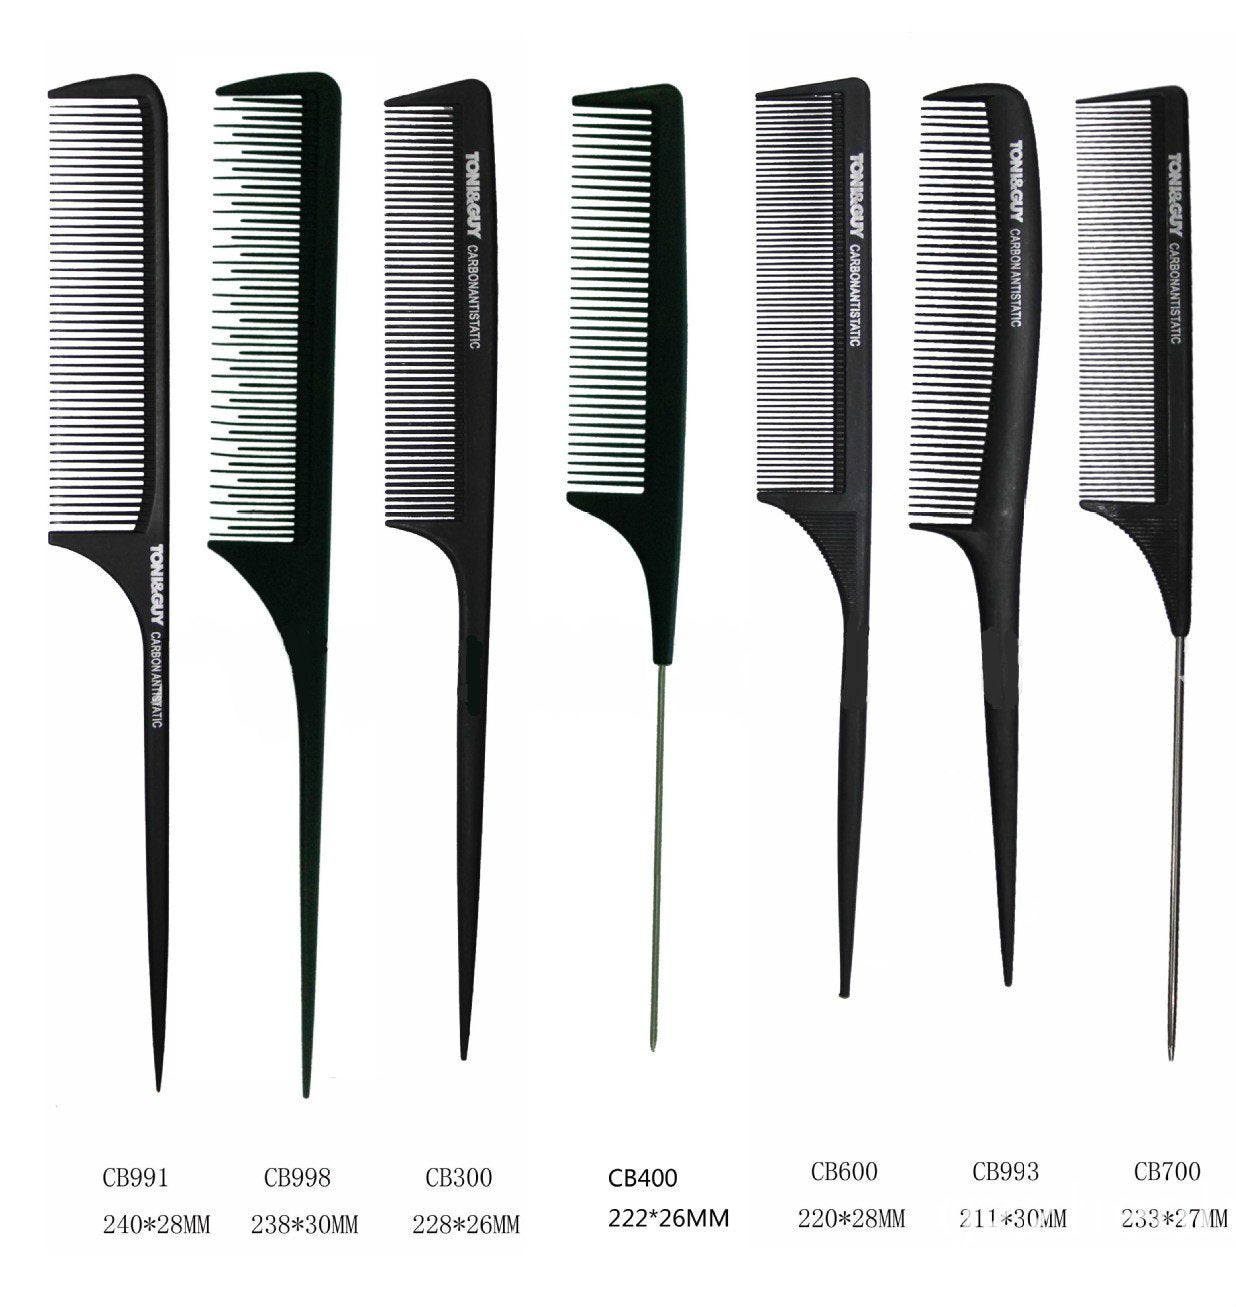 Pointed-tail comb